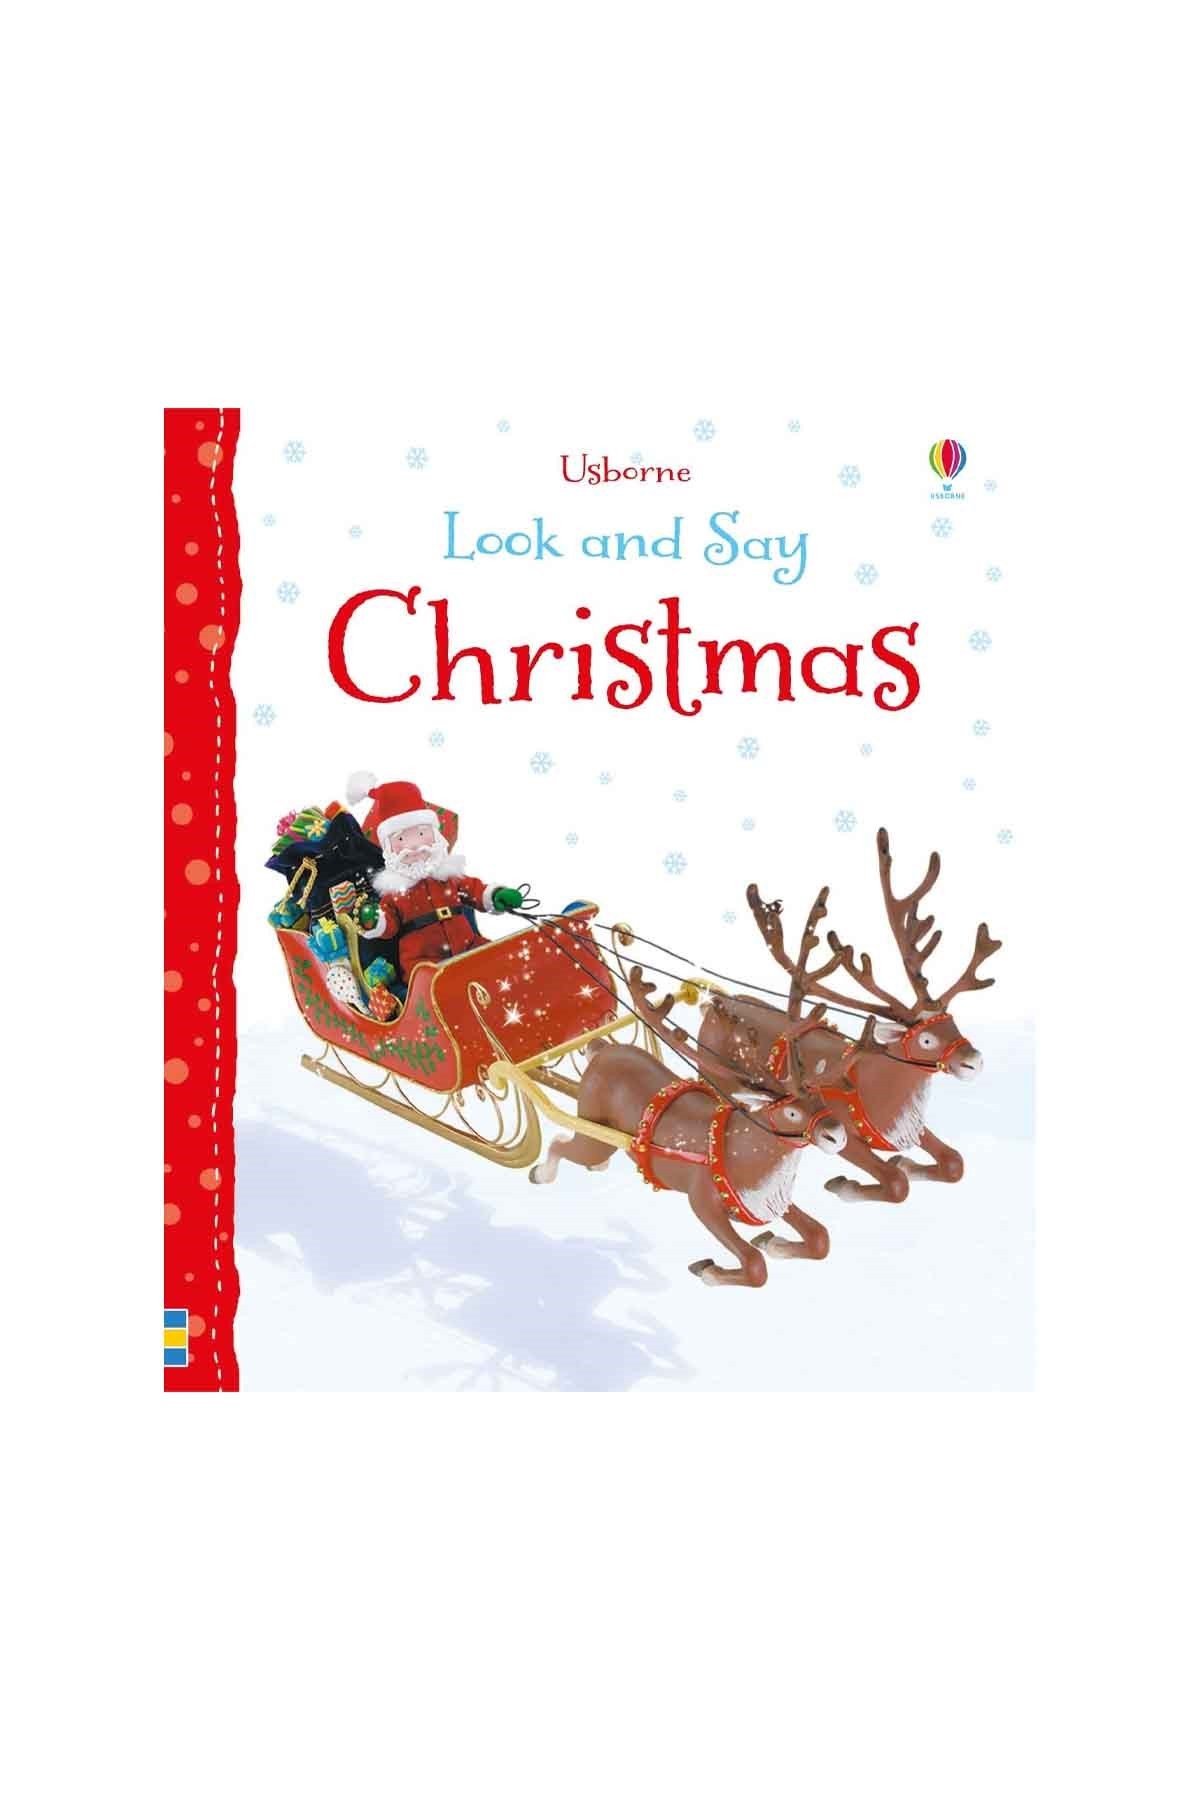 The Usborne Look And Say Christmas